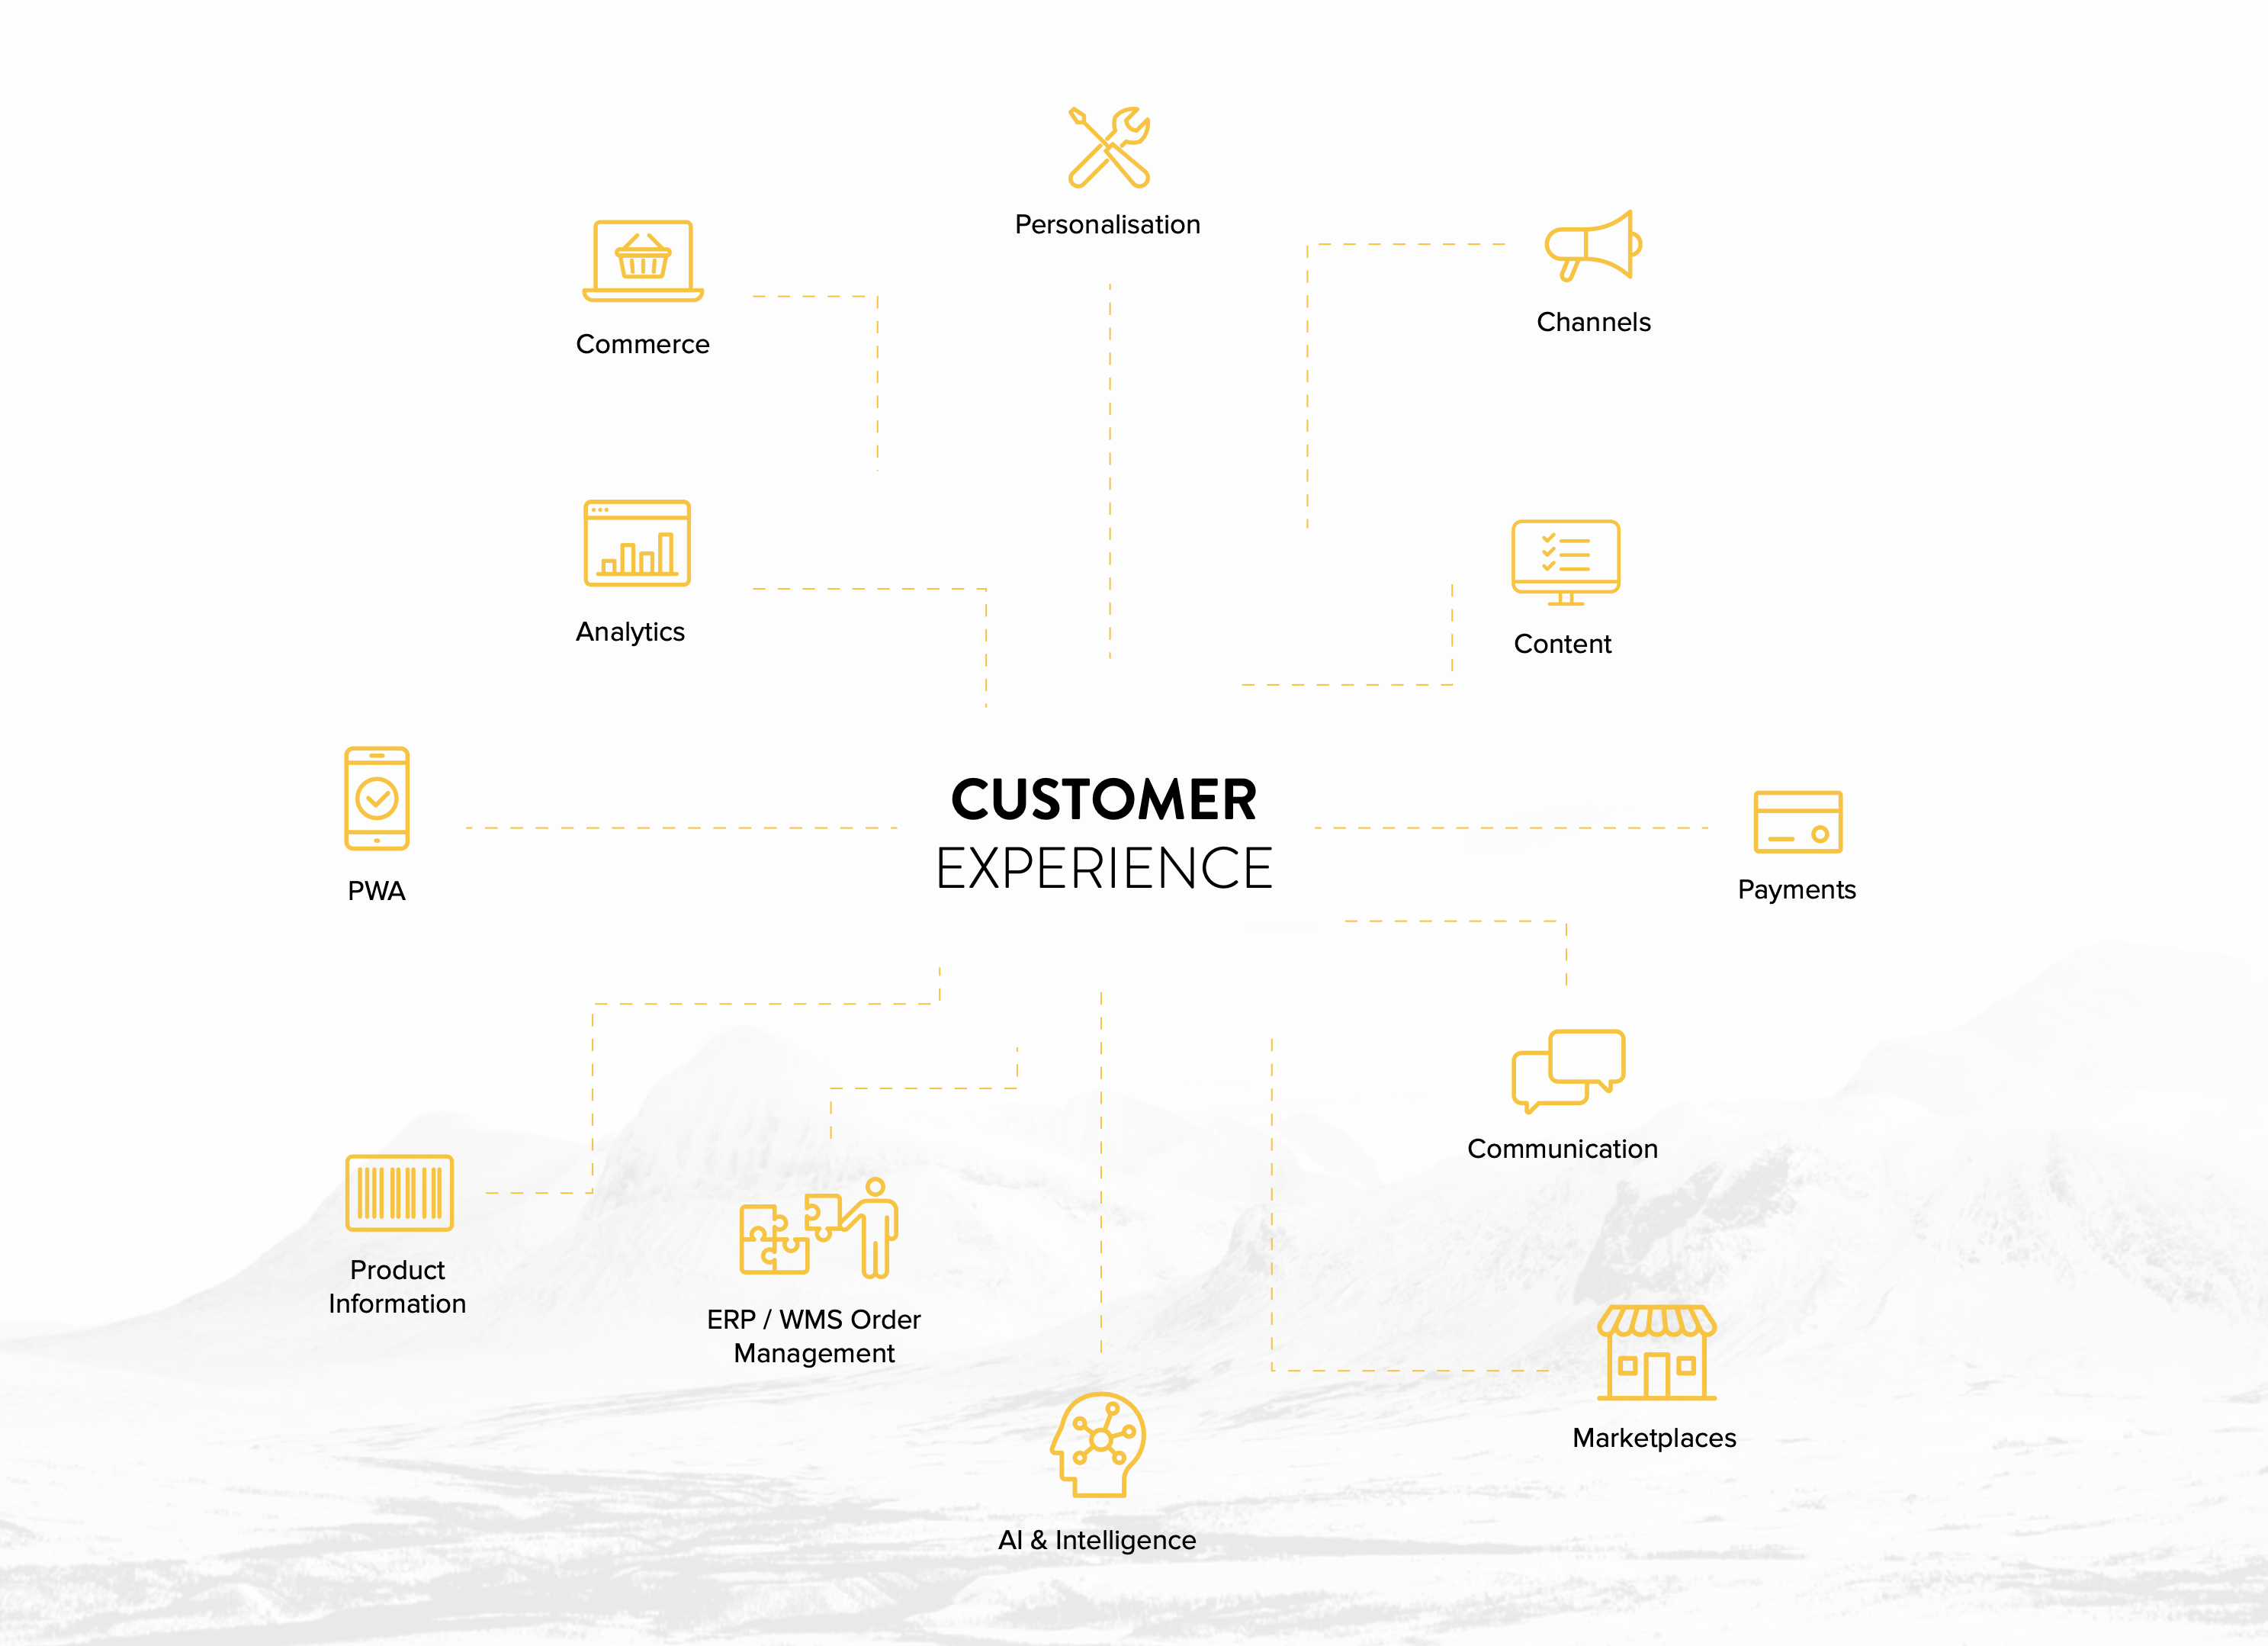 Image showing the elements that make up customer experience.